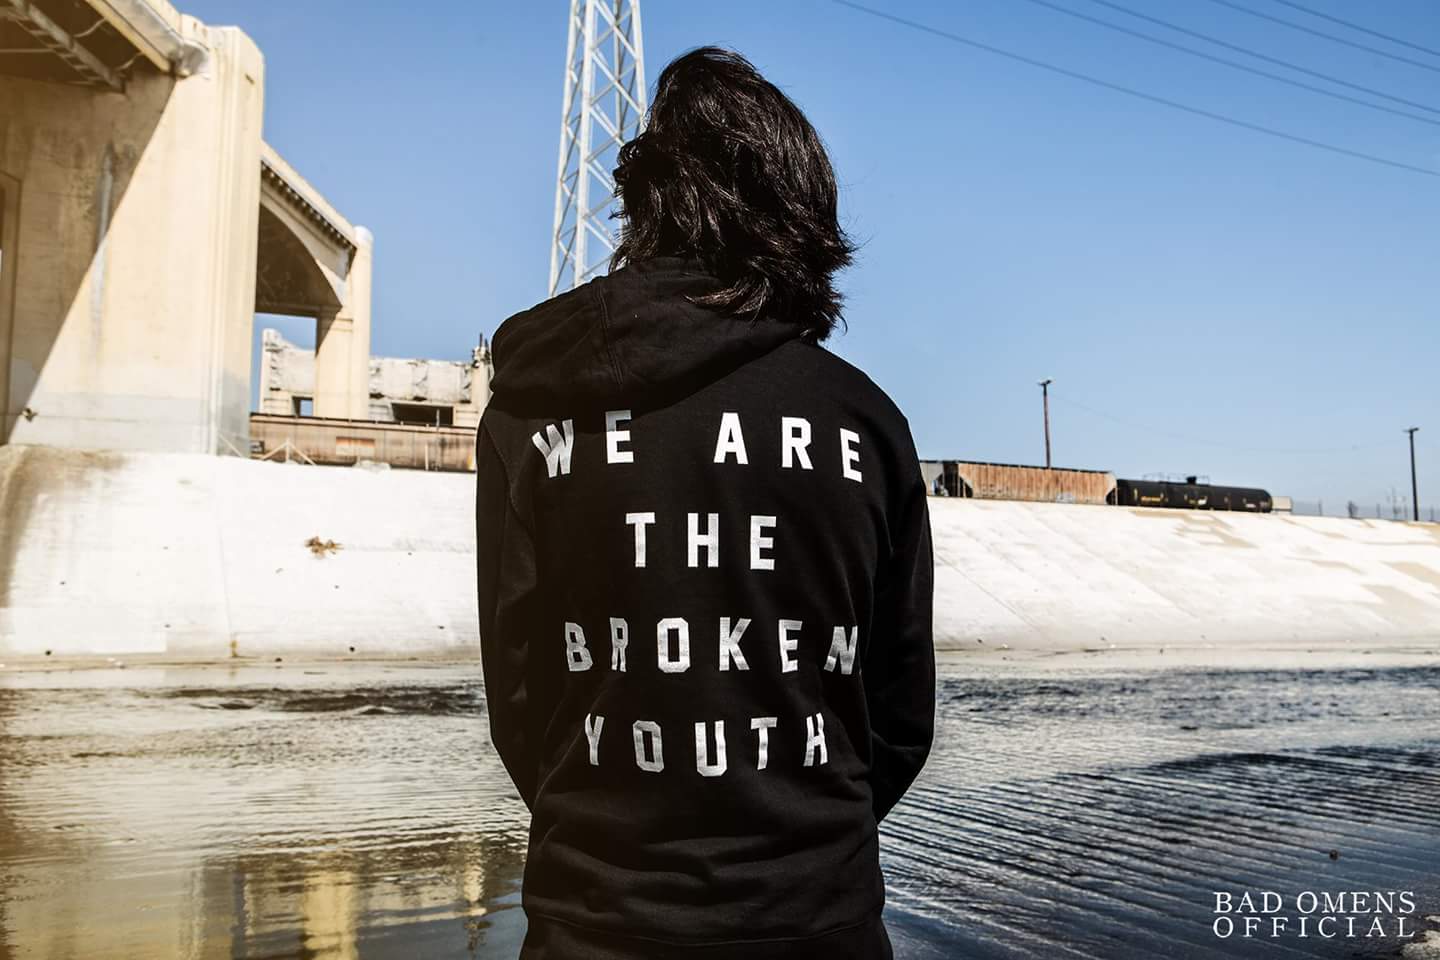 BAD OMENS on Twitter: staring to get cold.. yourself this 'Broken Youth' hoodie from our webstore and stay warm! Shop now at https://t.co/Ha5CodPamn https://t.co/MOolGLN8ov" / Twitter